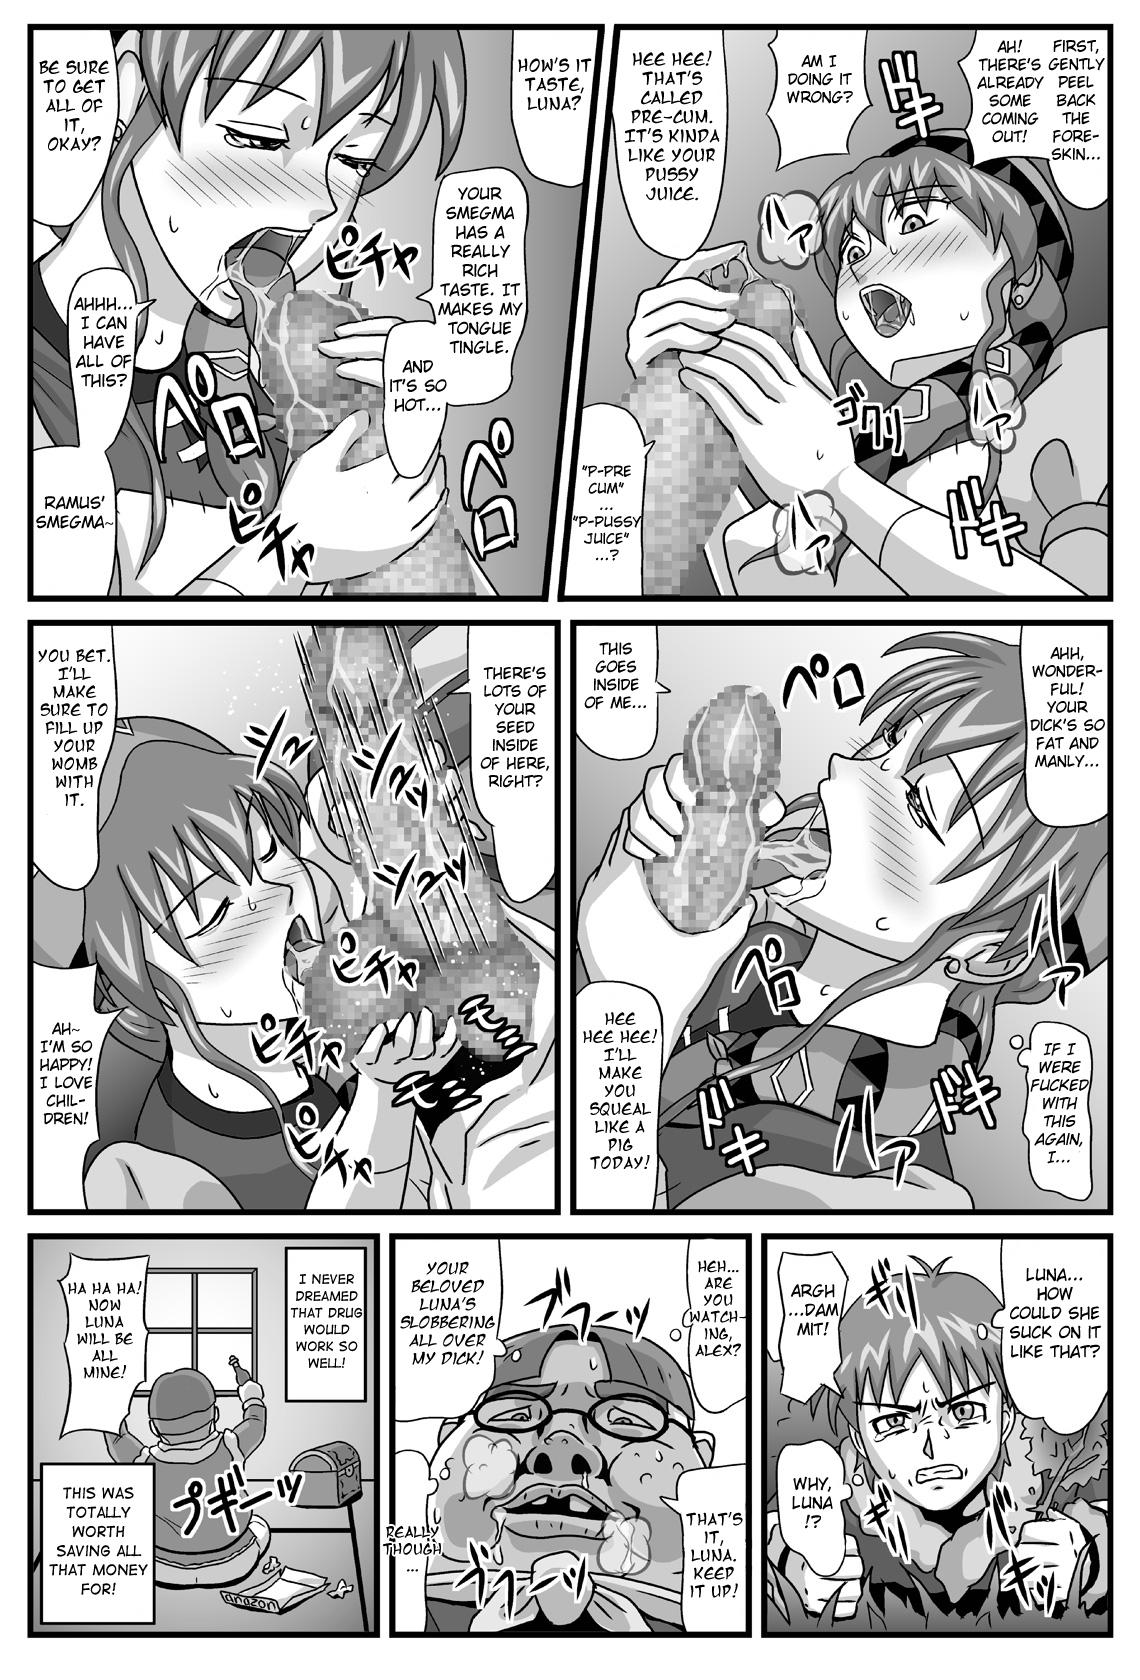 Fuck The Cumdumpster Princess of Burg 01 - Lunar silver star story Freckles - Page 7